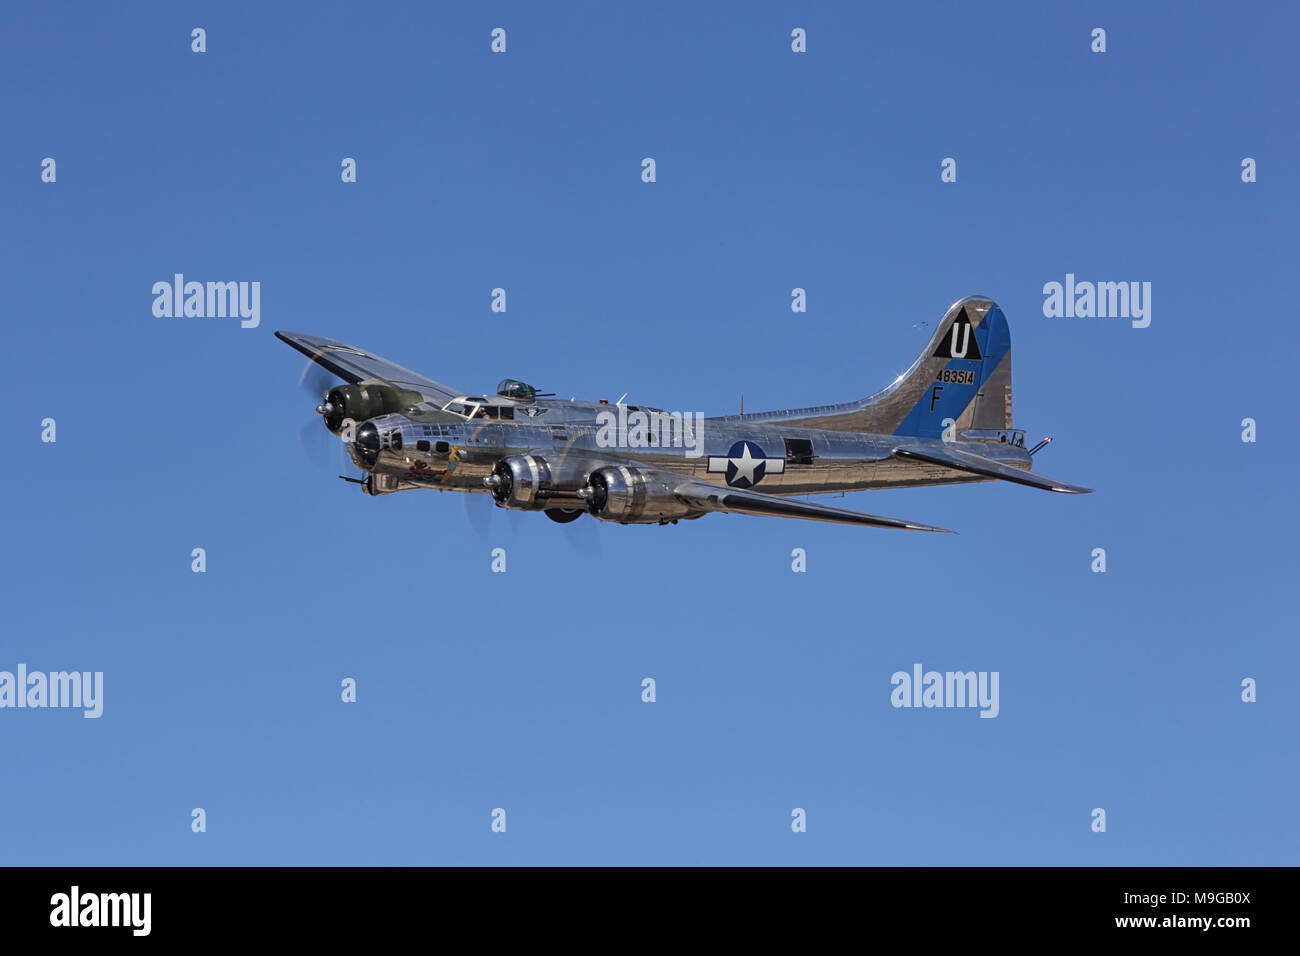 Lancaster, USA. 25th Mar, 2018. A B-17G Flying Fortress, named “Sentimental Journey”, flies by at the Los Angeles County Air Show. Credit: Kilmer Media/Alamy Live News Stock Photo